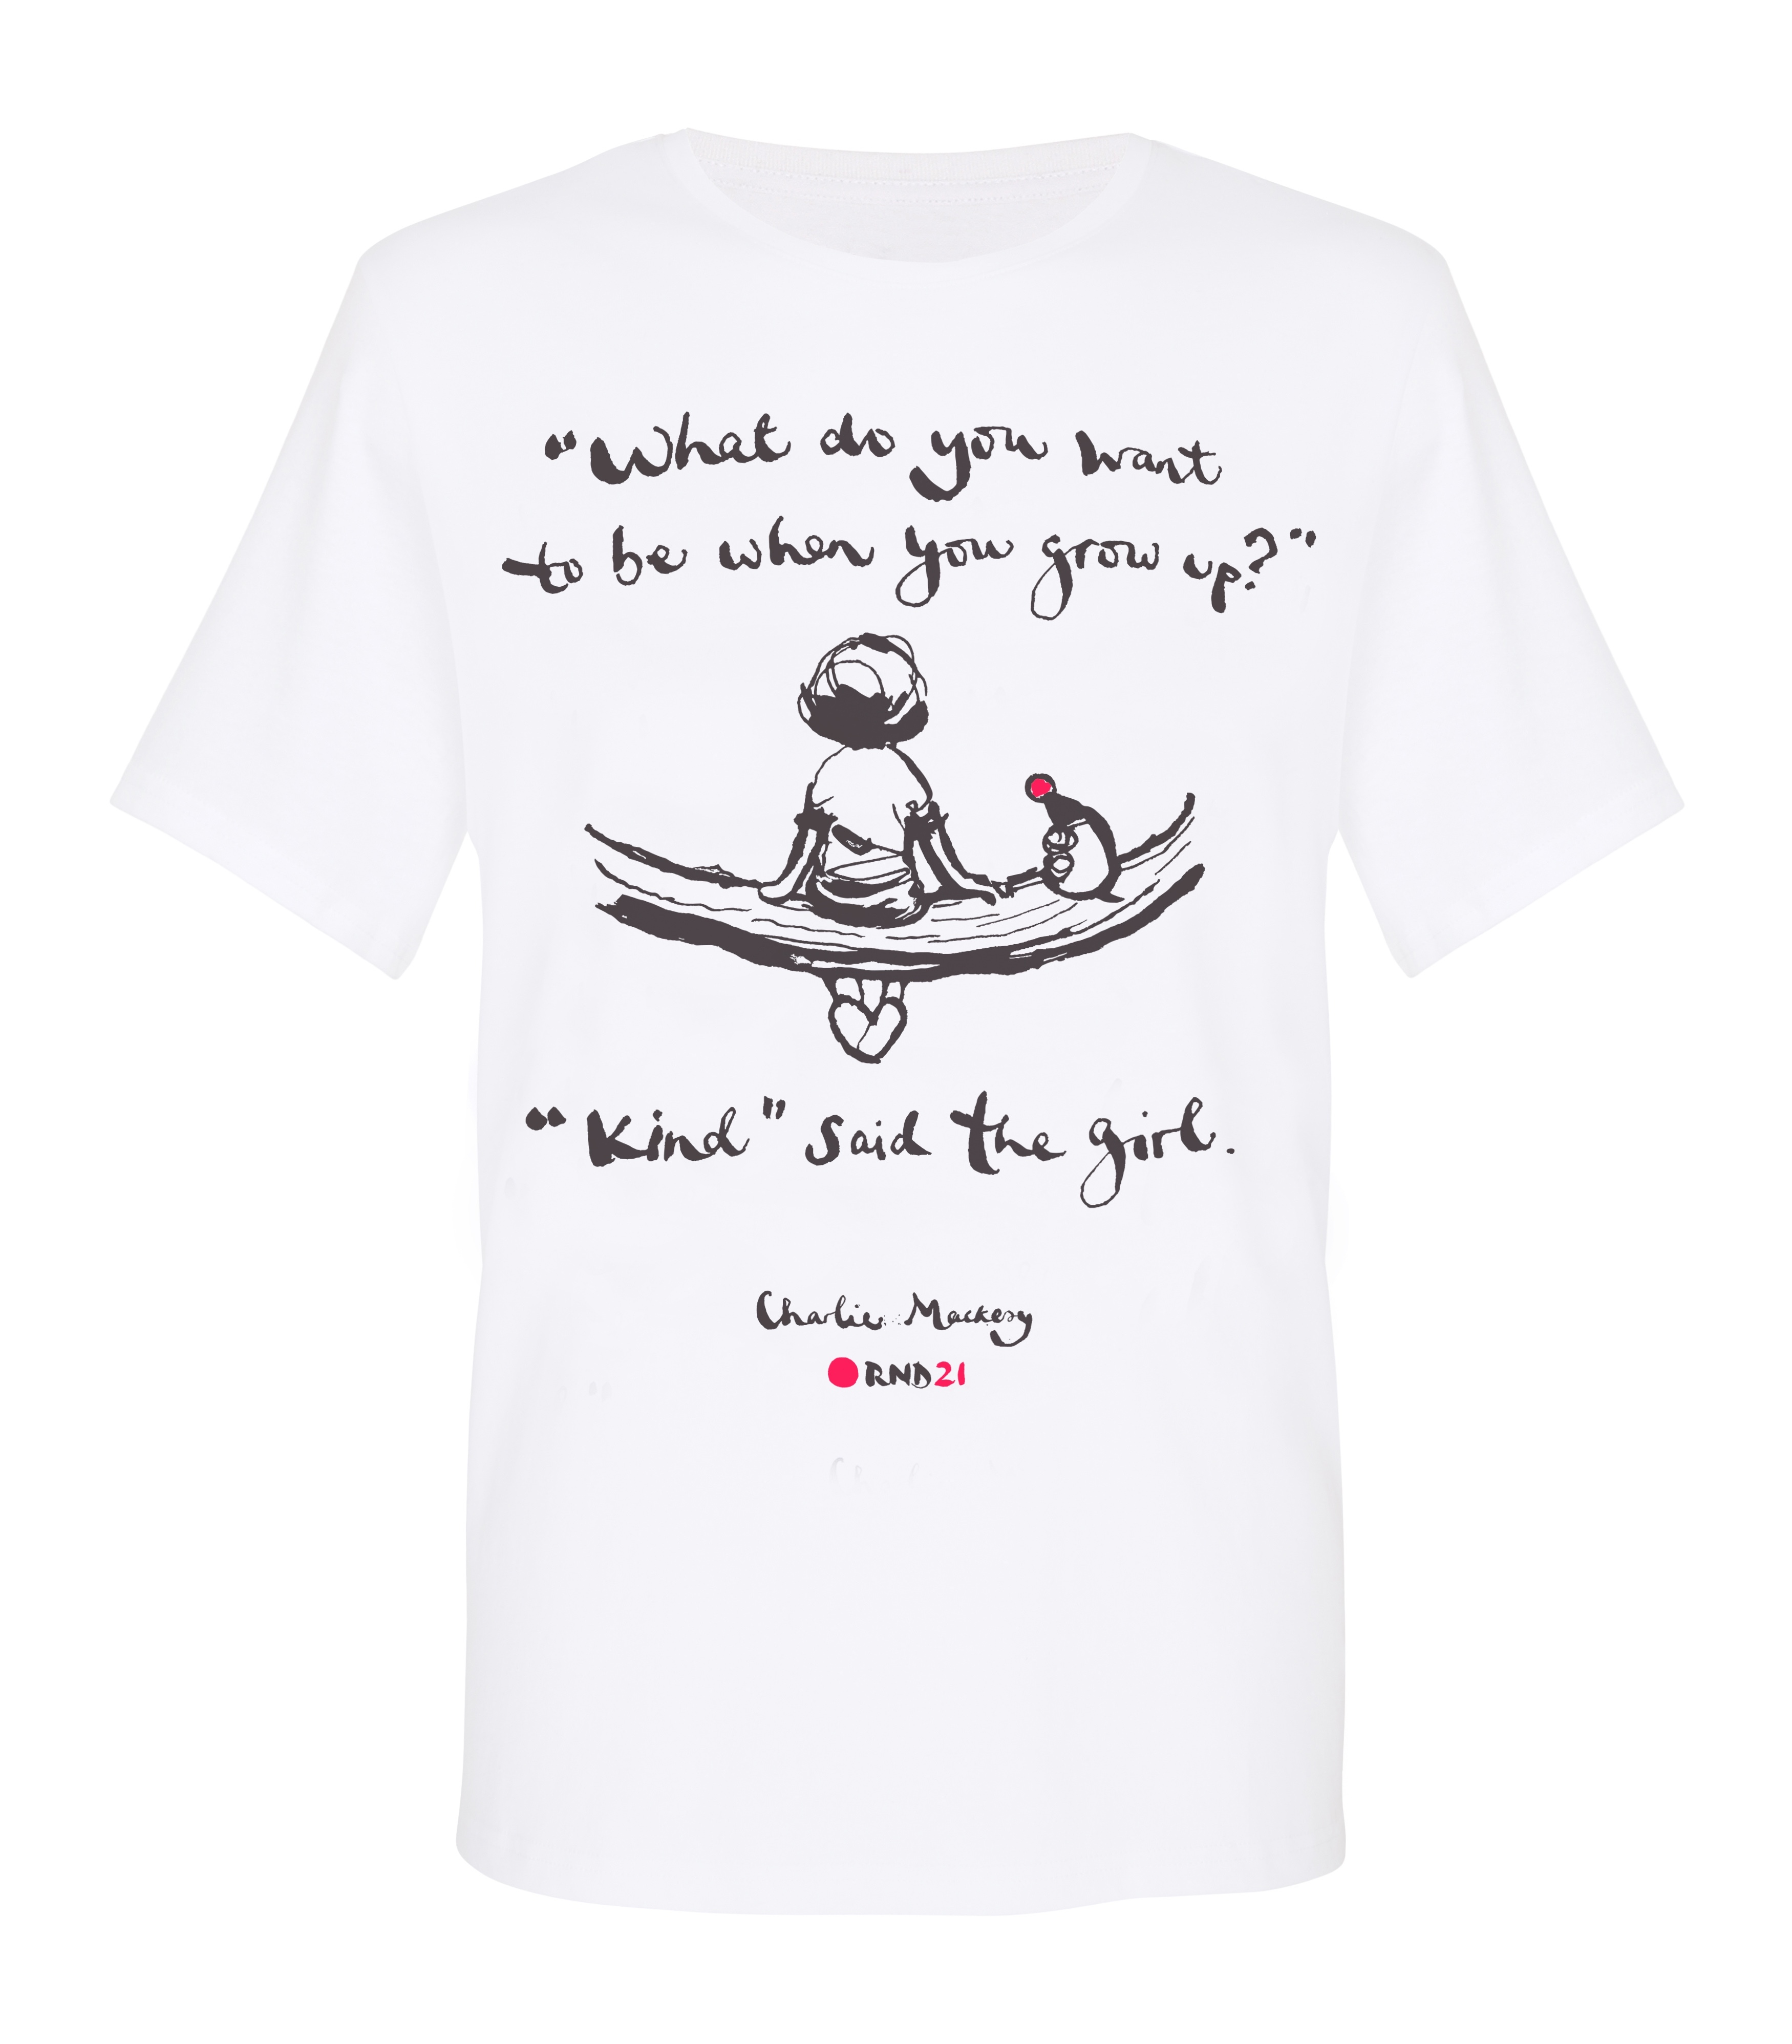 Two Limited Edition Red Nose Day T Shirts Designed By